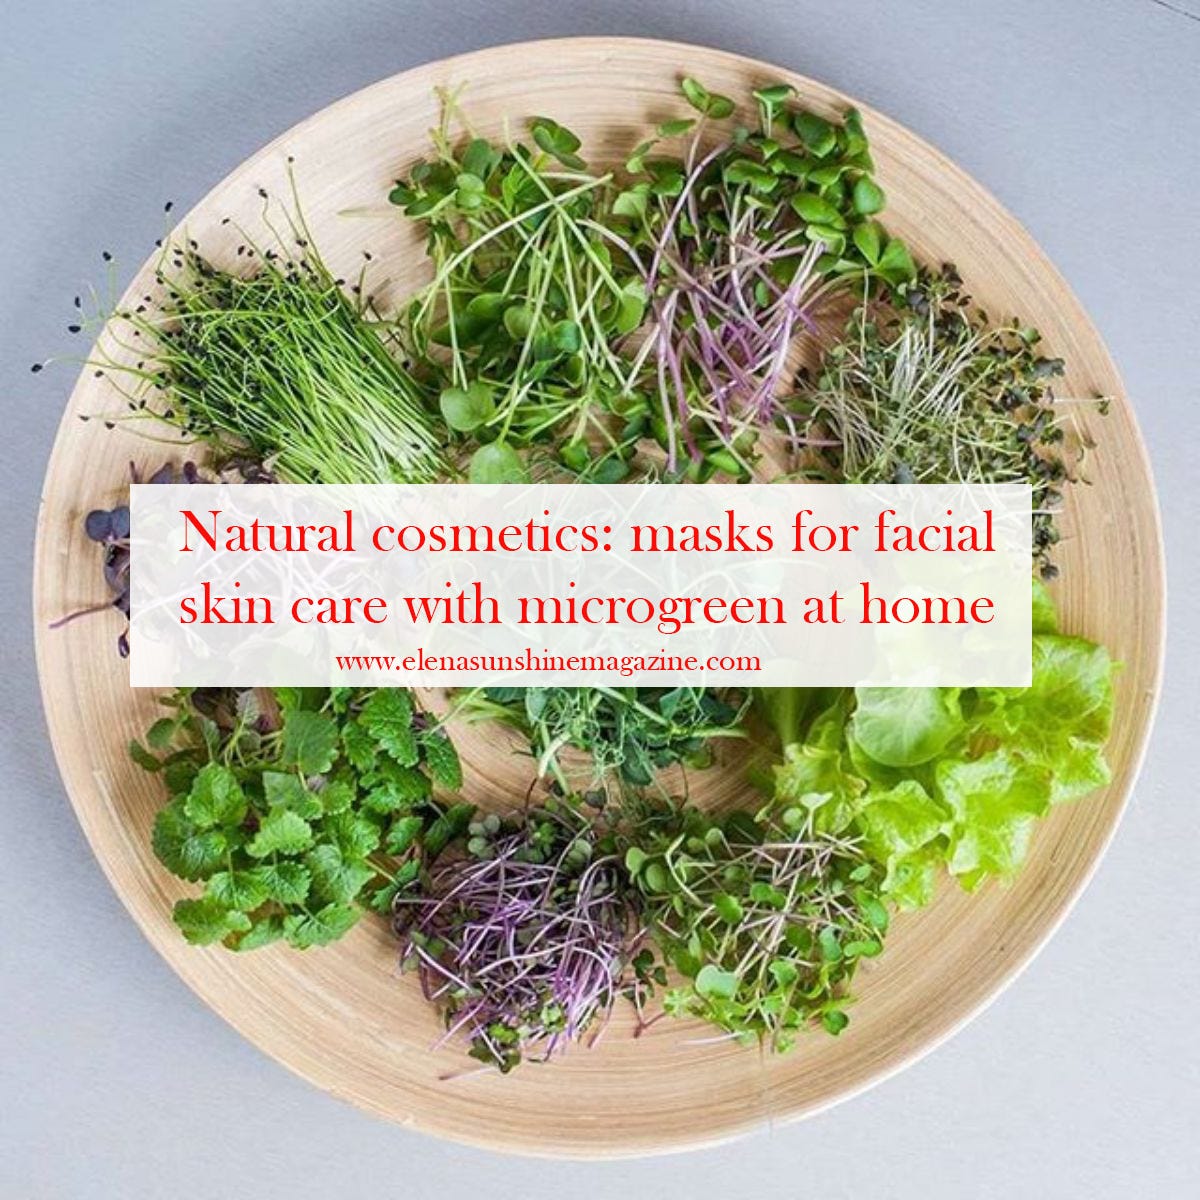 Natural cosmetics masks for facial skin care with microgreen at home by Elena picture pic